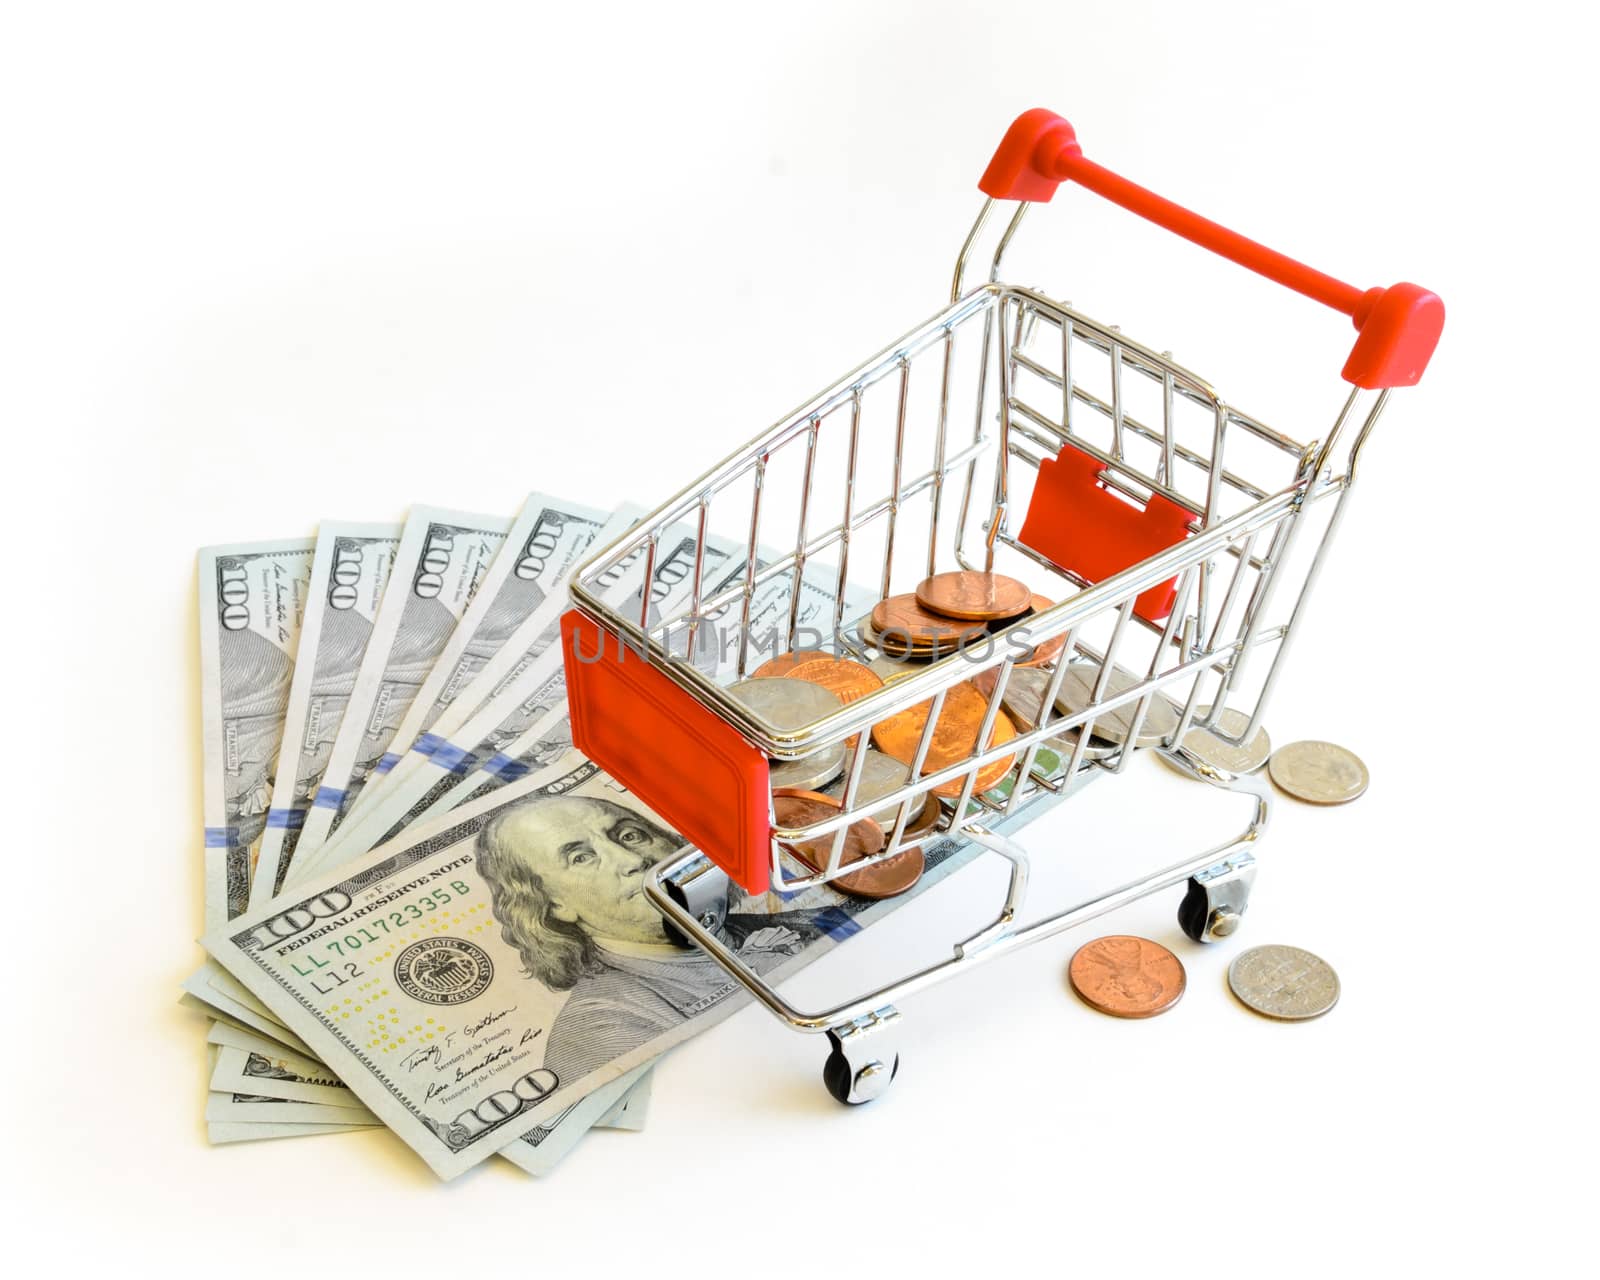 US dollars banknote and coins with shopping cart isolated on white background. Concept of currency, business, finance and online shopping or e-commerce.